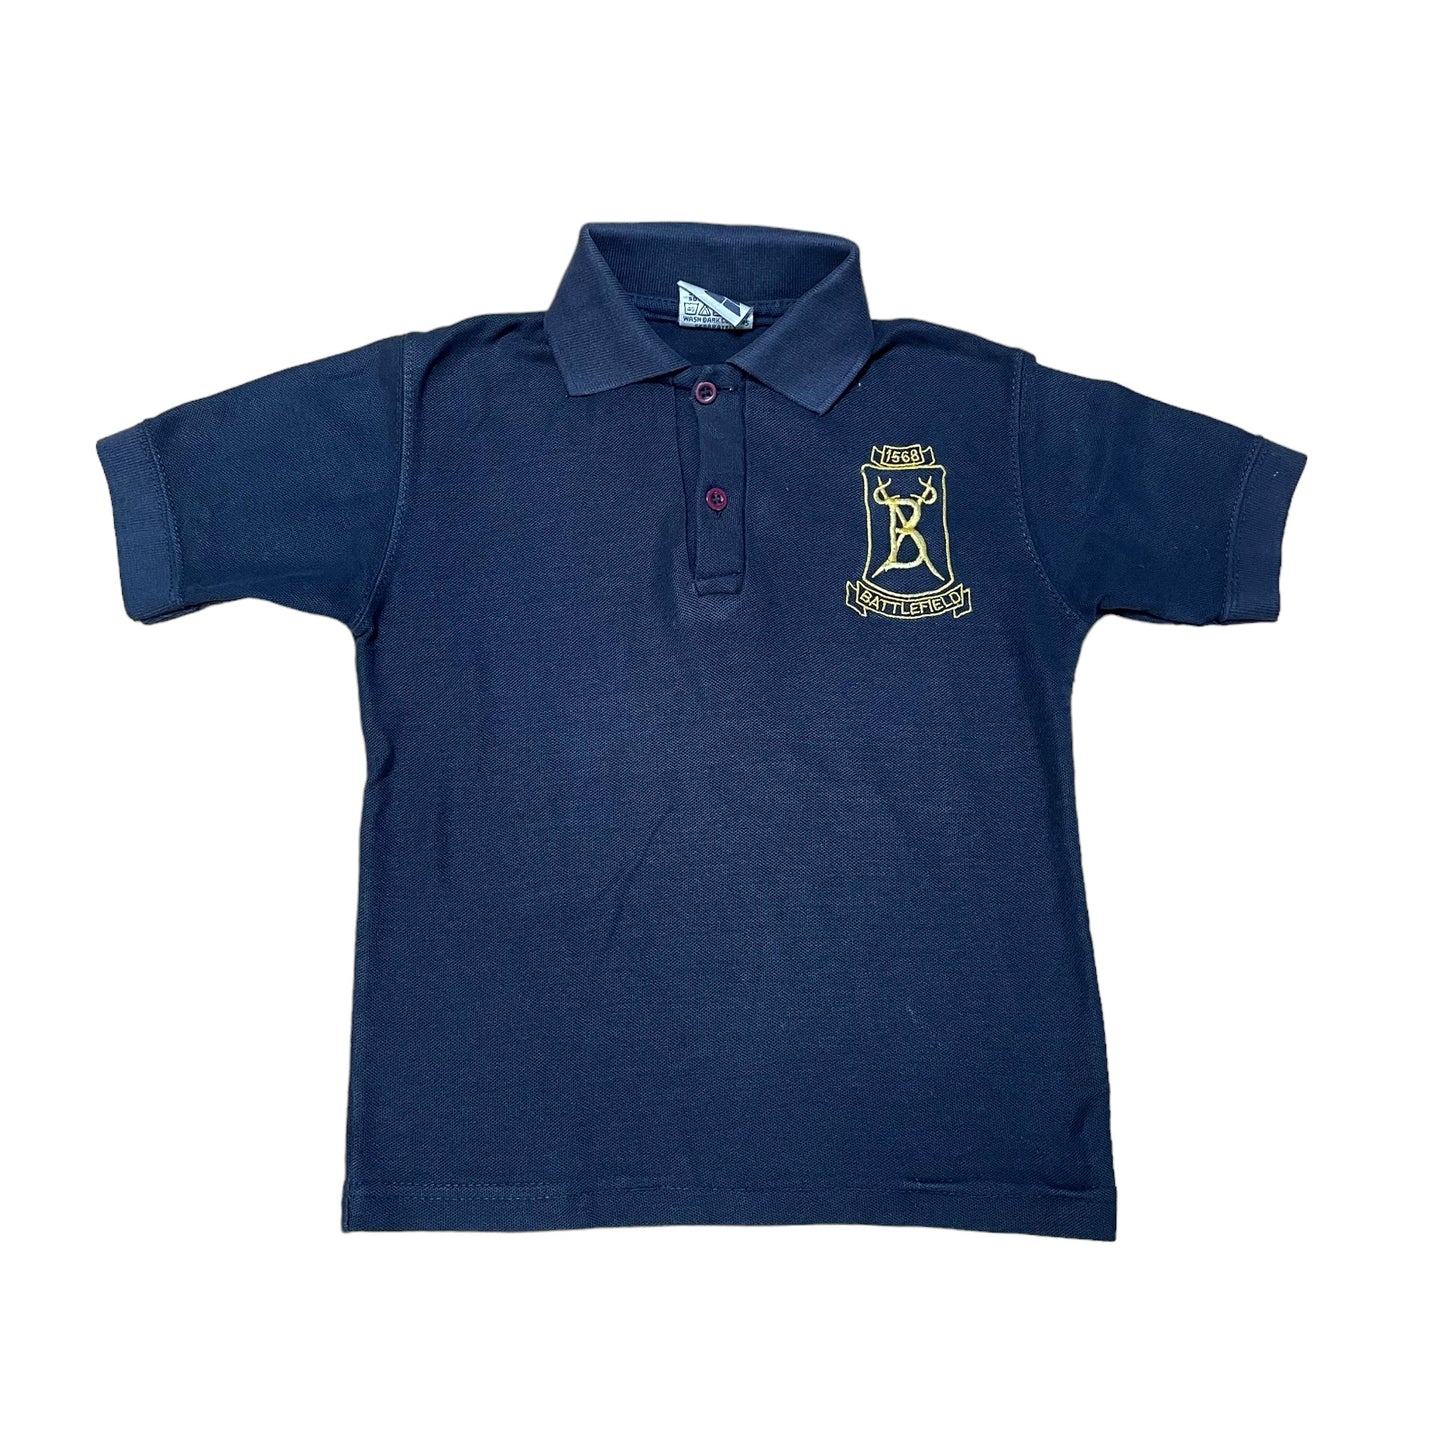 Battlefield Primary Navy Blue Polo Shirt